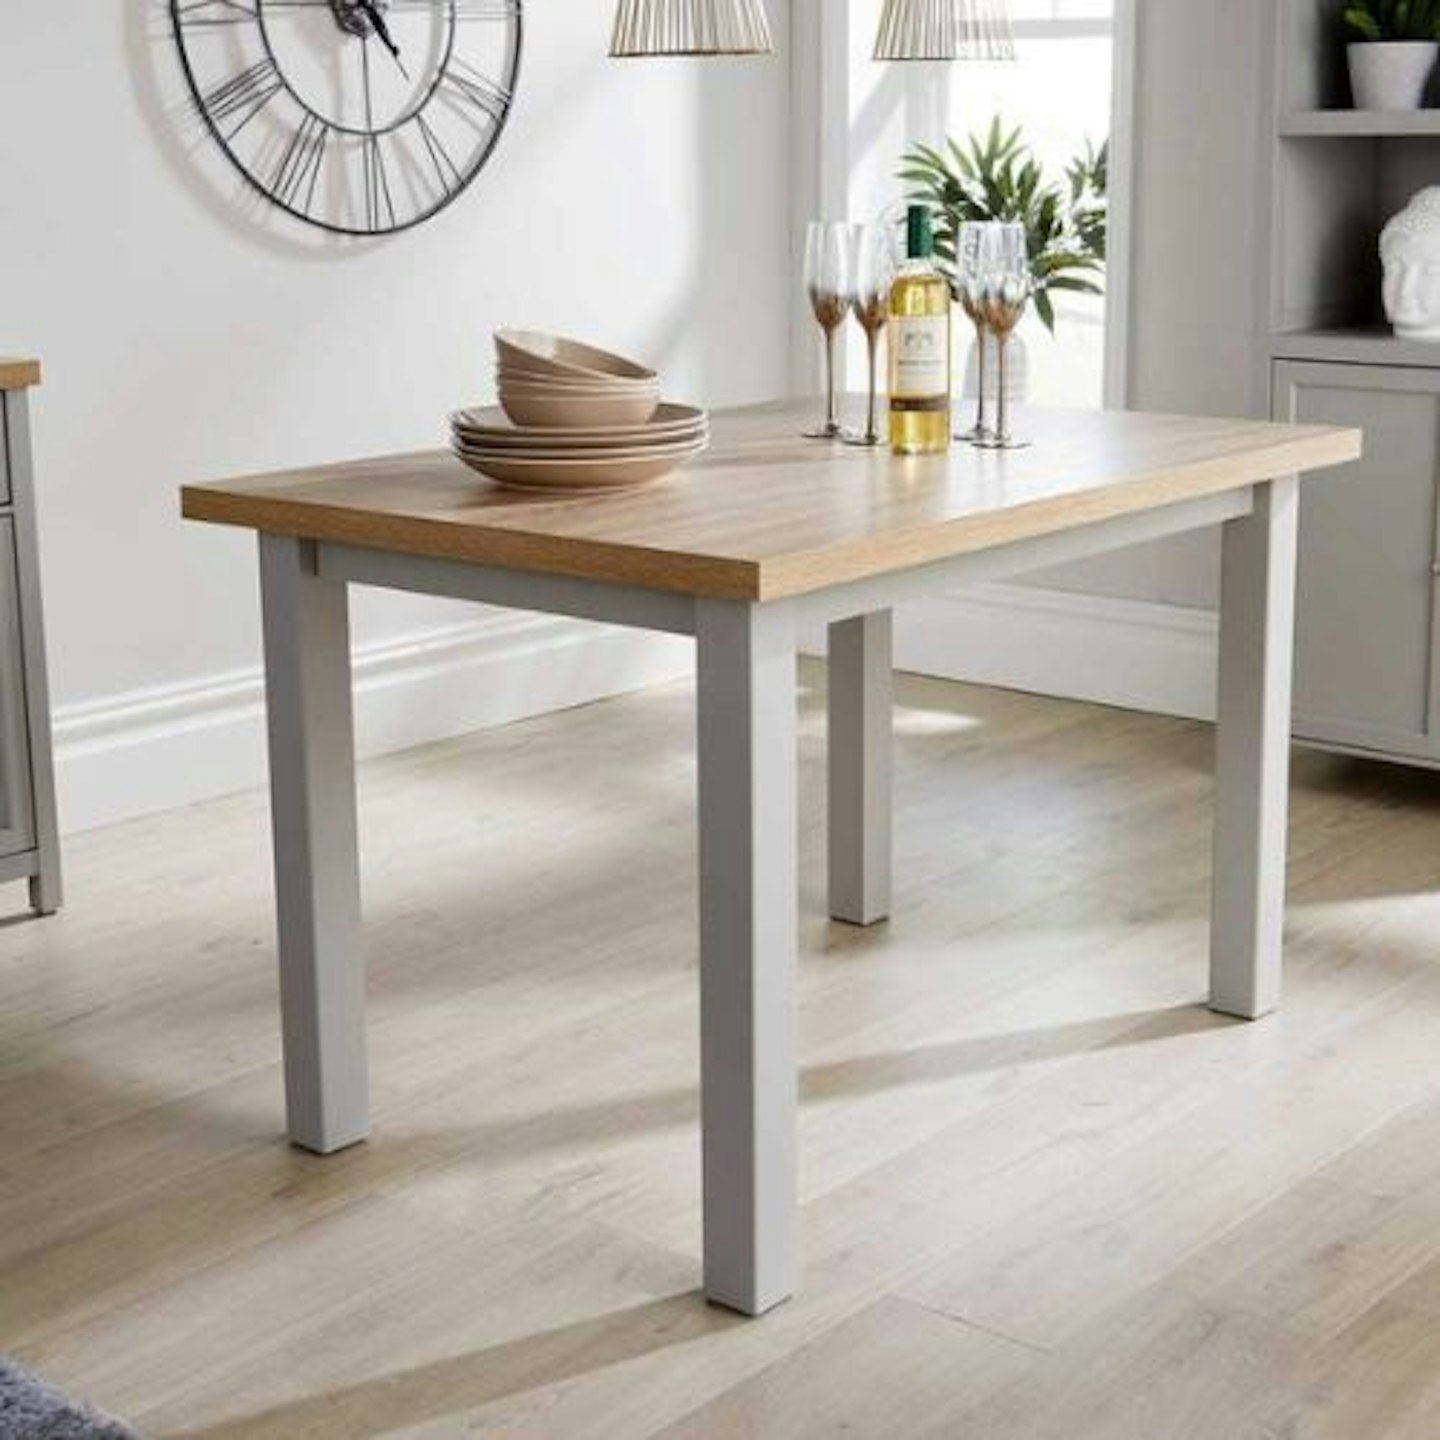 Two Tone Oak Wood Dining Table